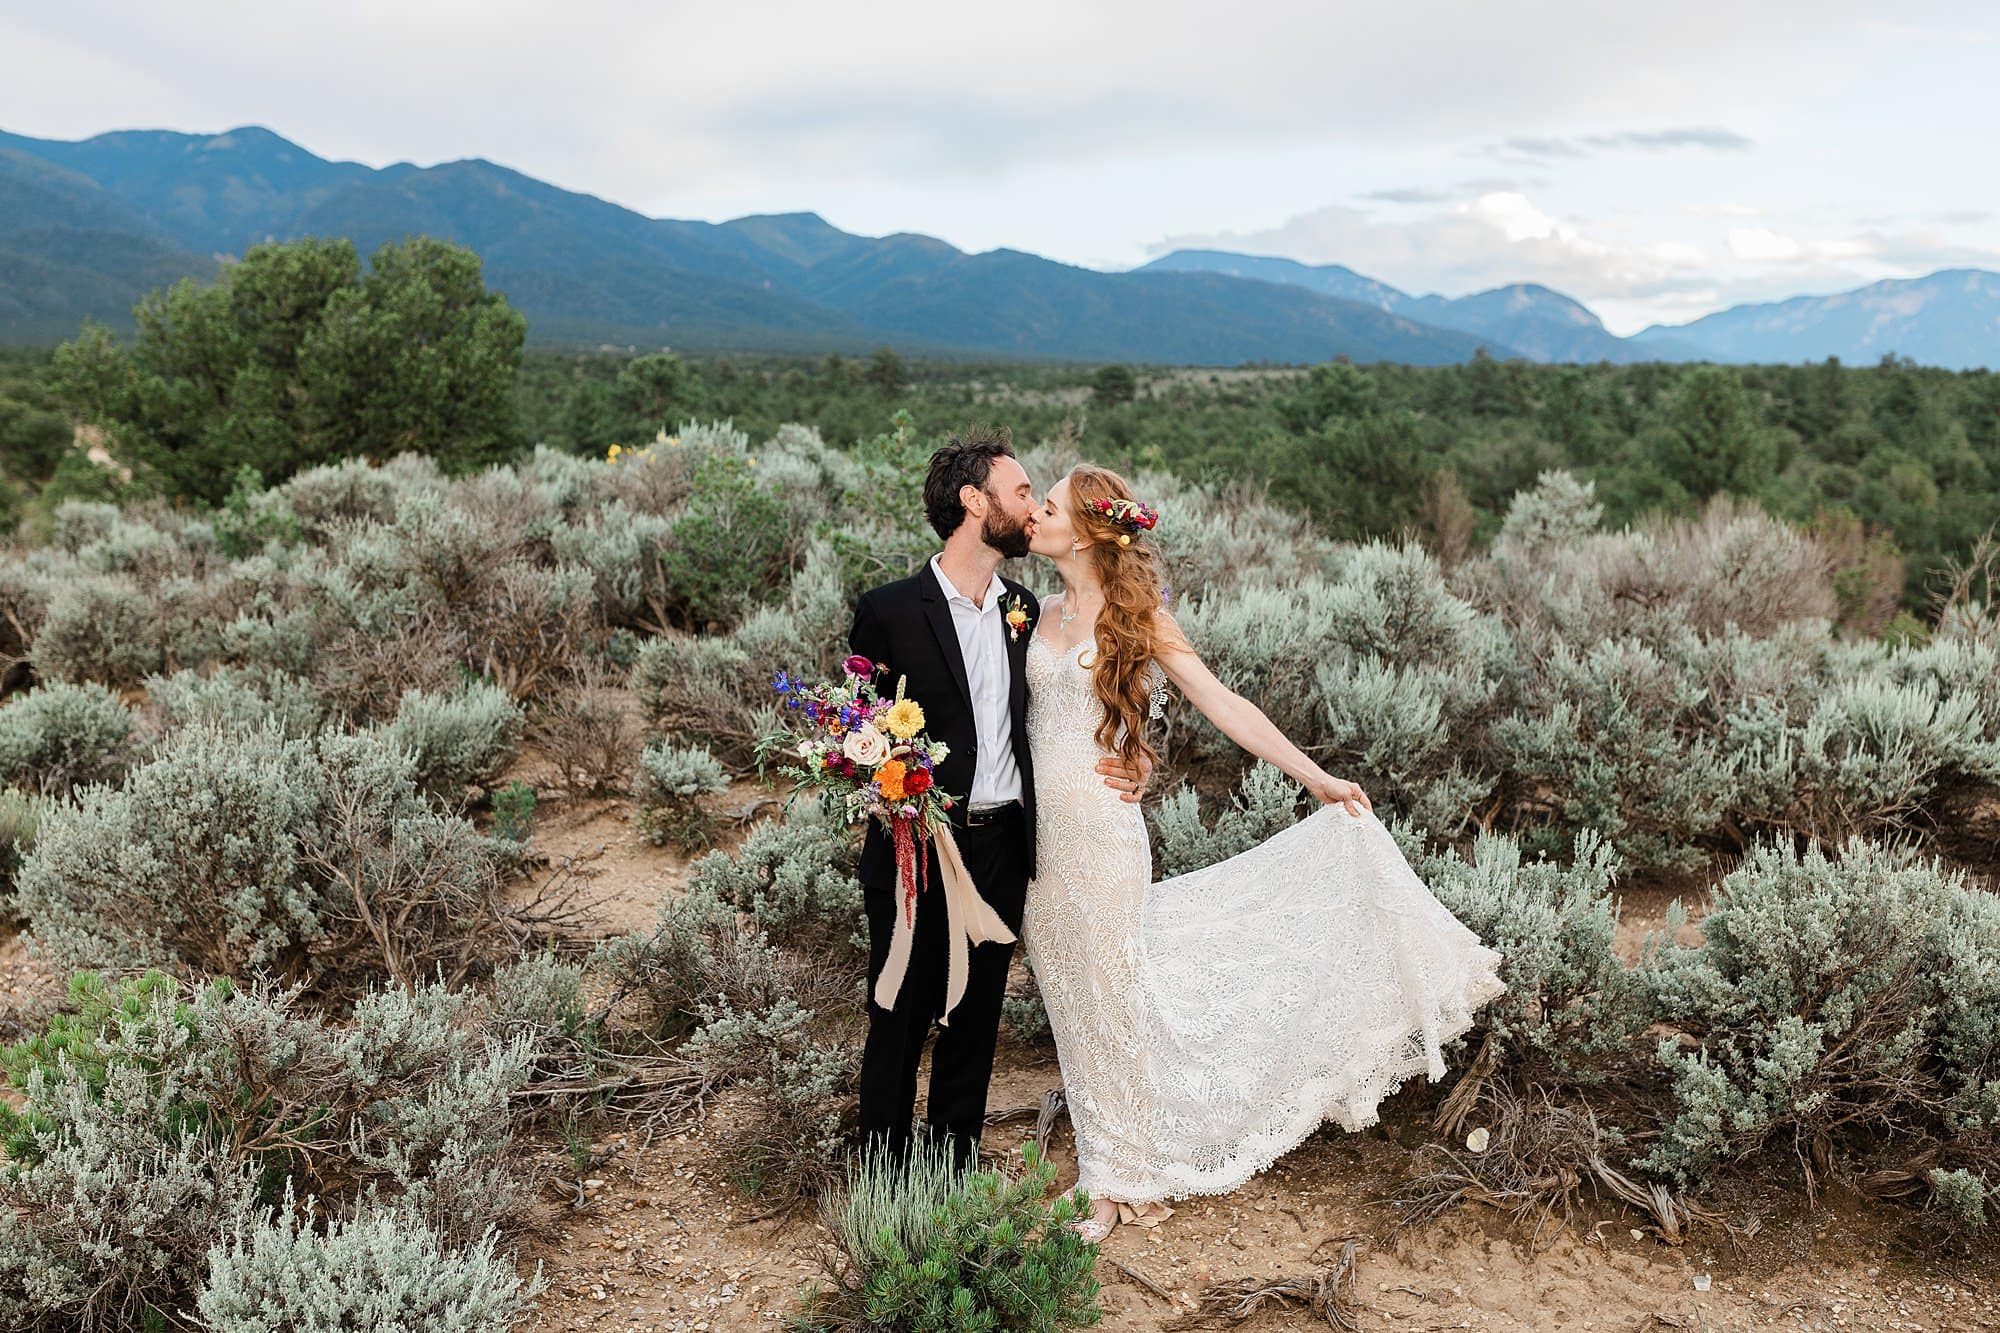 A couple kisses on a goji berry farm during their intimate wedding in Taos, New Mexico